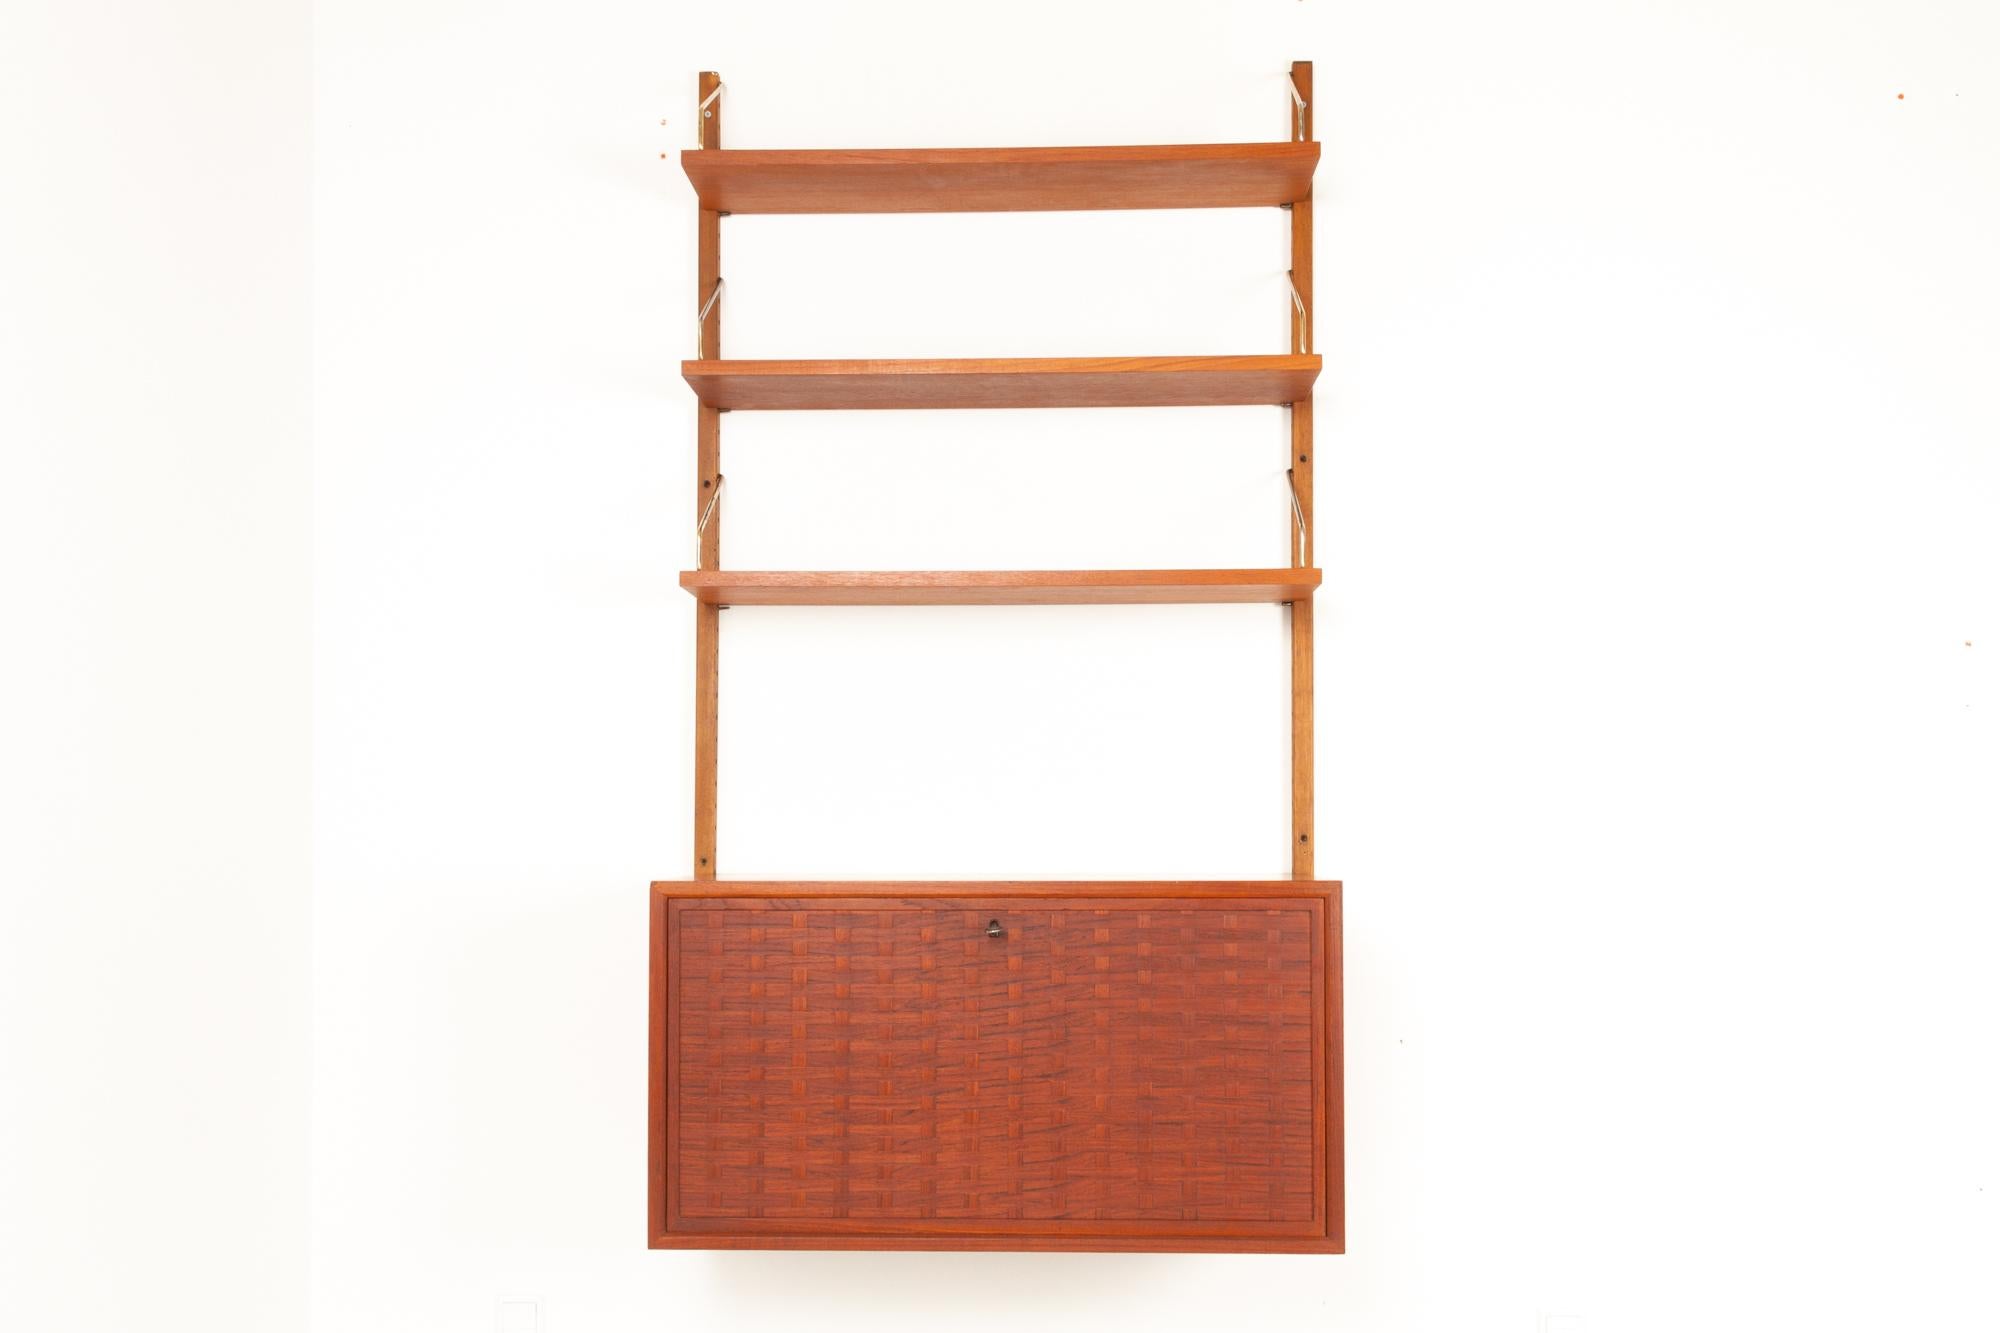 Vintage Danish teak wall unit by Poul Cadovius for Cado, 1960s
Mid-Century Modern shelving system model Royal by Danish architect Poul Cadovius designed in 1948. Versatile and flexible floating bookcase that allows for continuous rearranging to